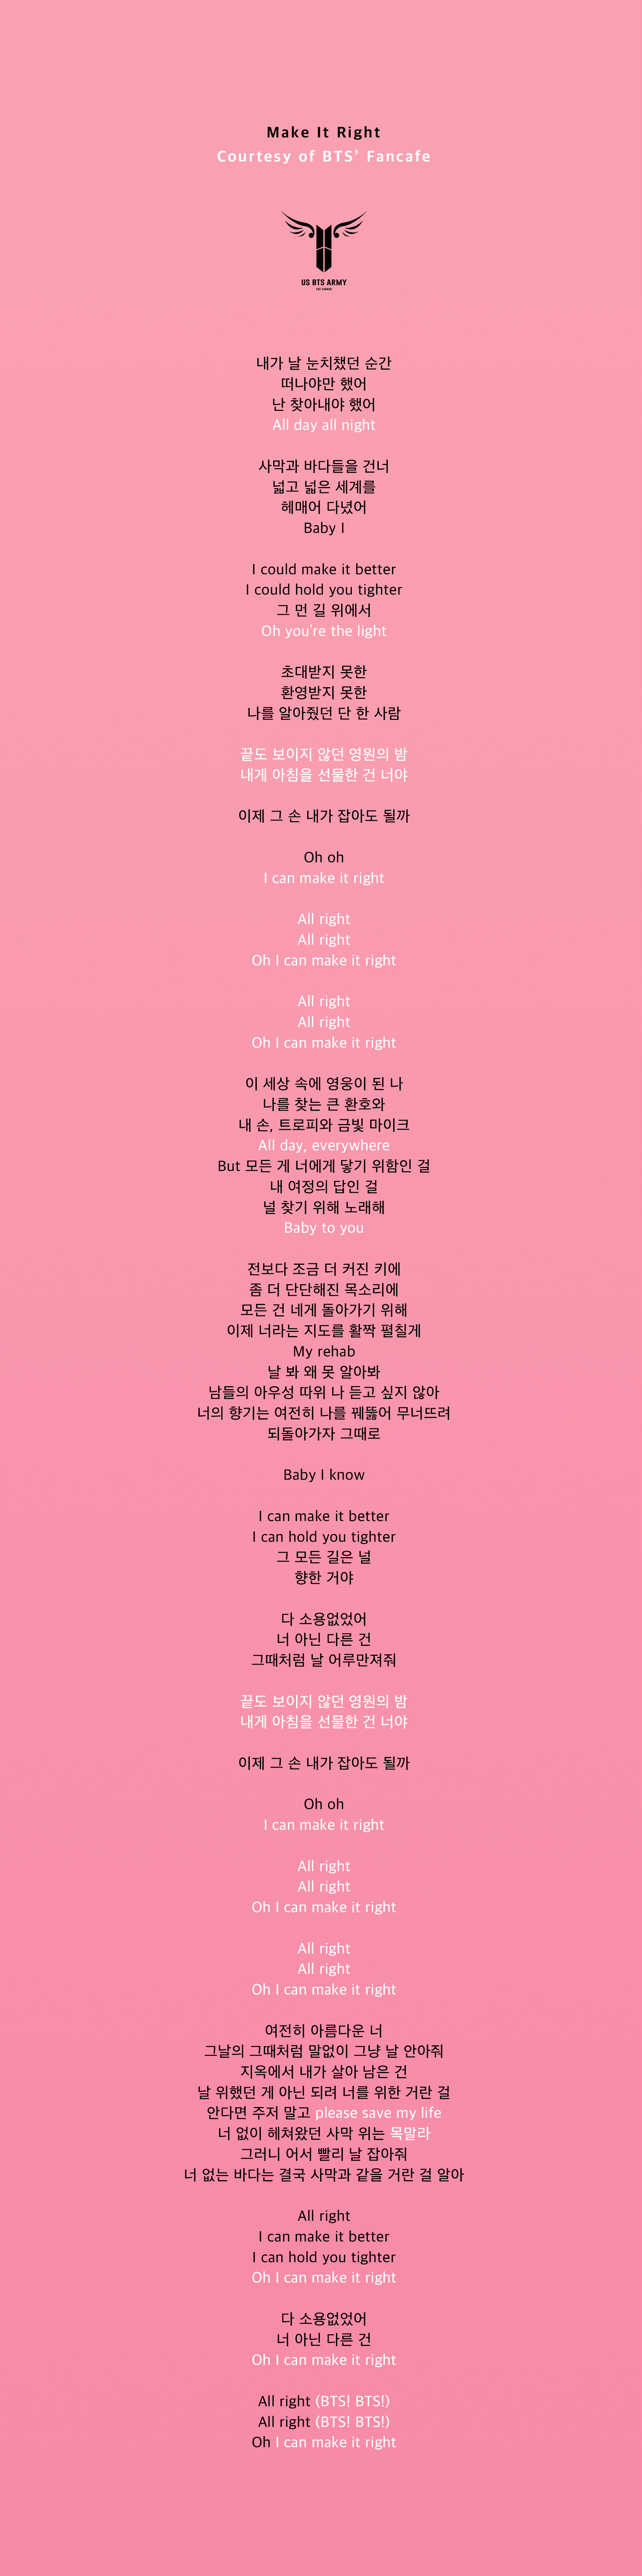 Make It Right Fanchant Us Bts Army